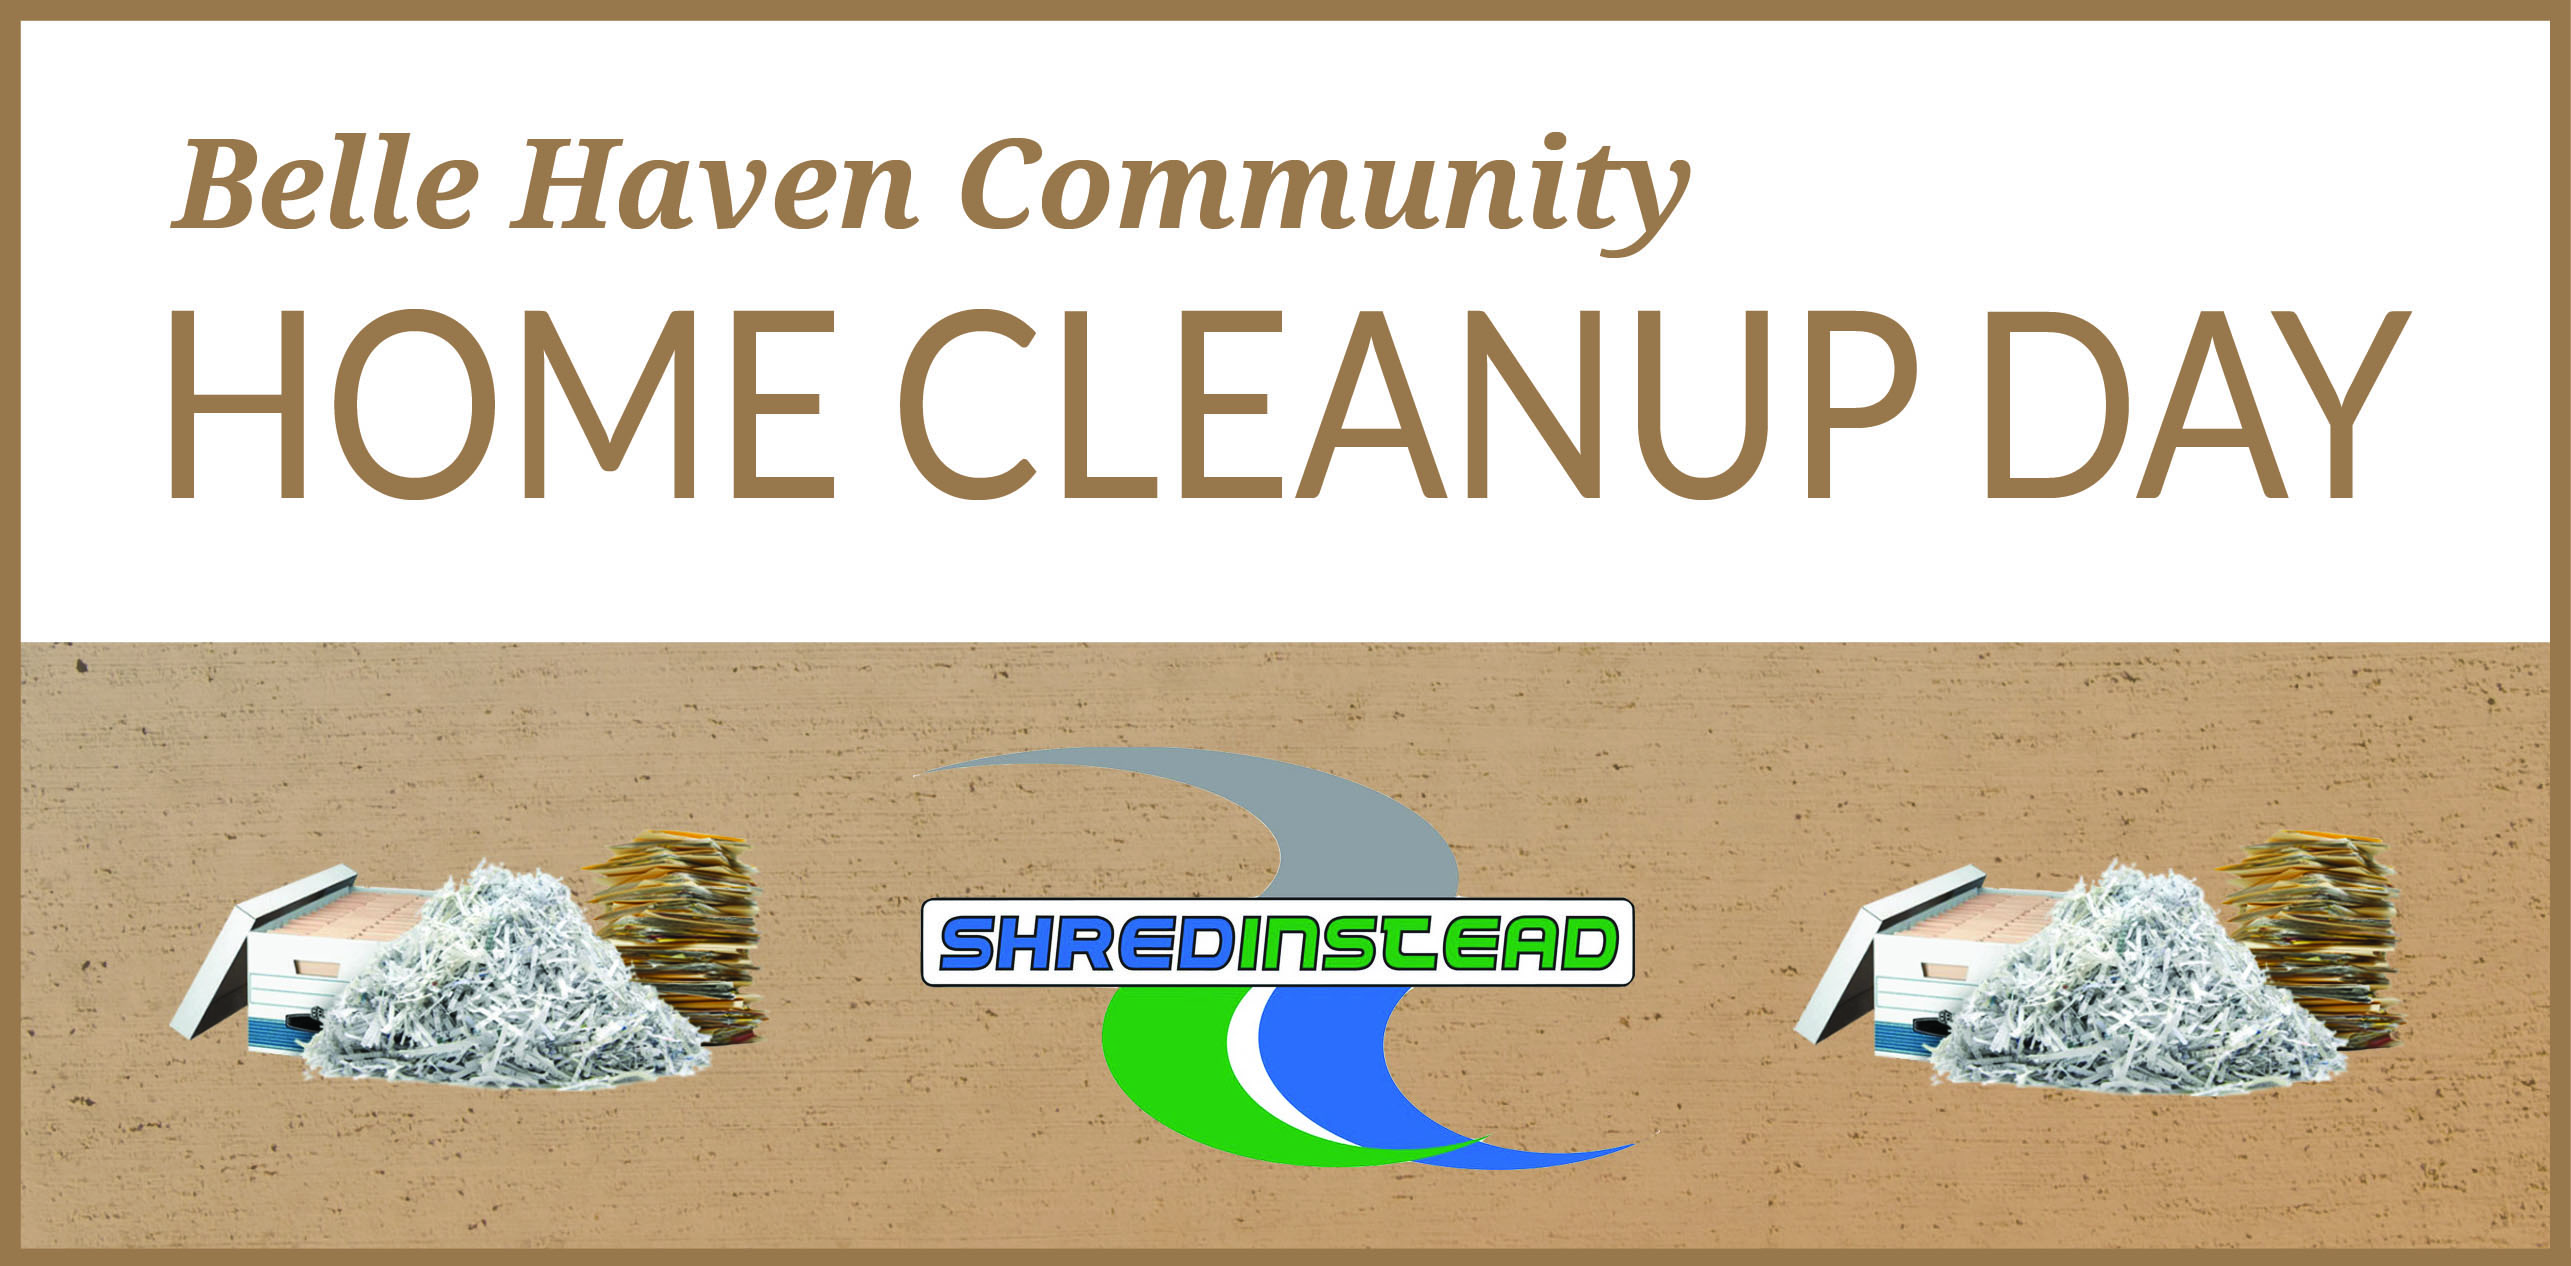 Home Cleanup Day